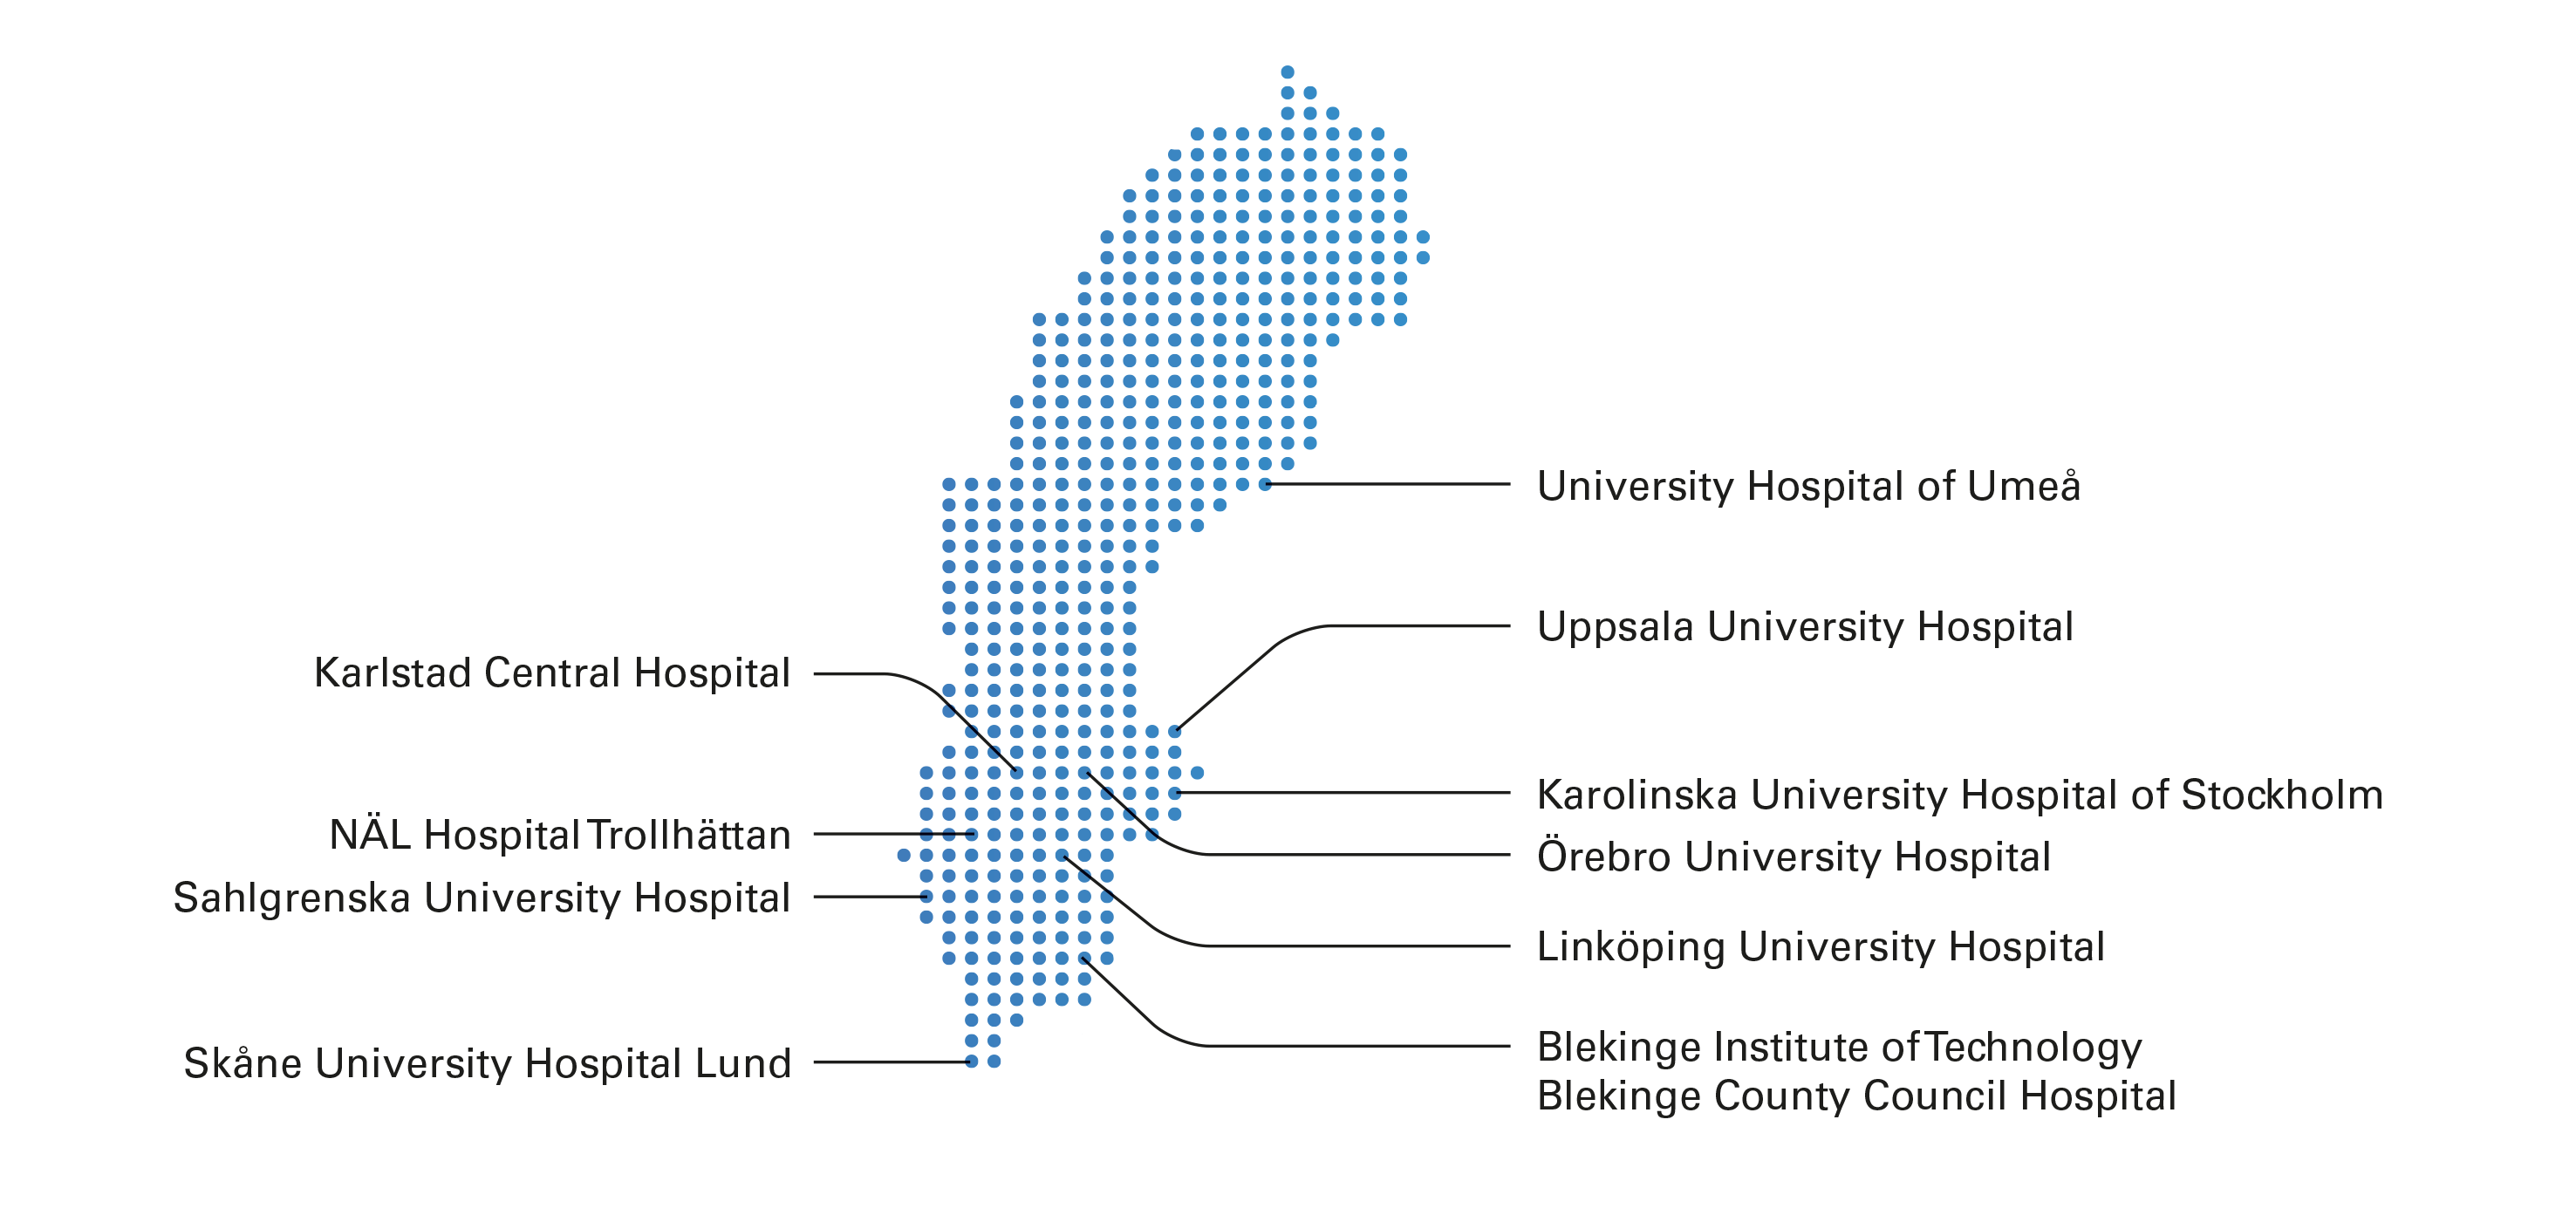 A graphical map of Sweden with pointers indicating where the 10 academic centres in the HiLOT study are